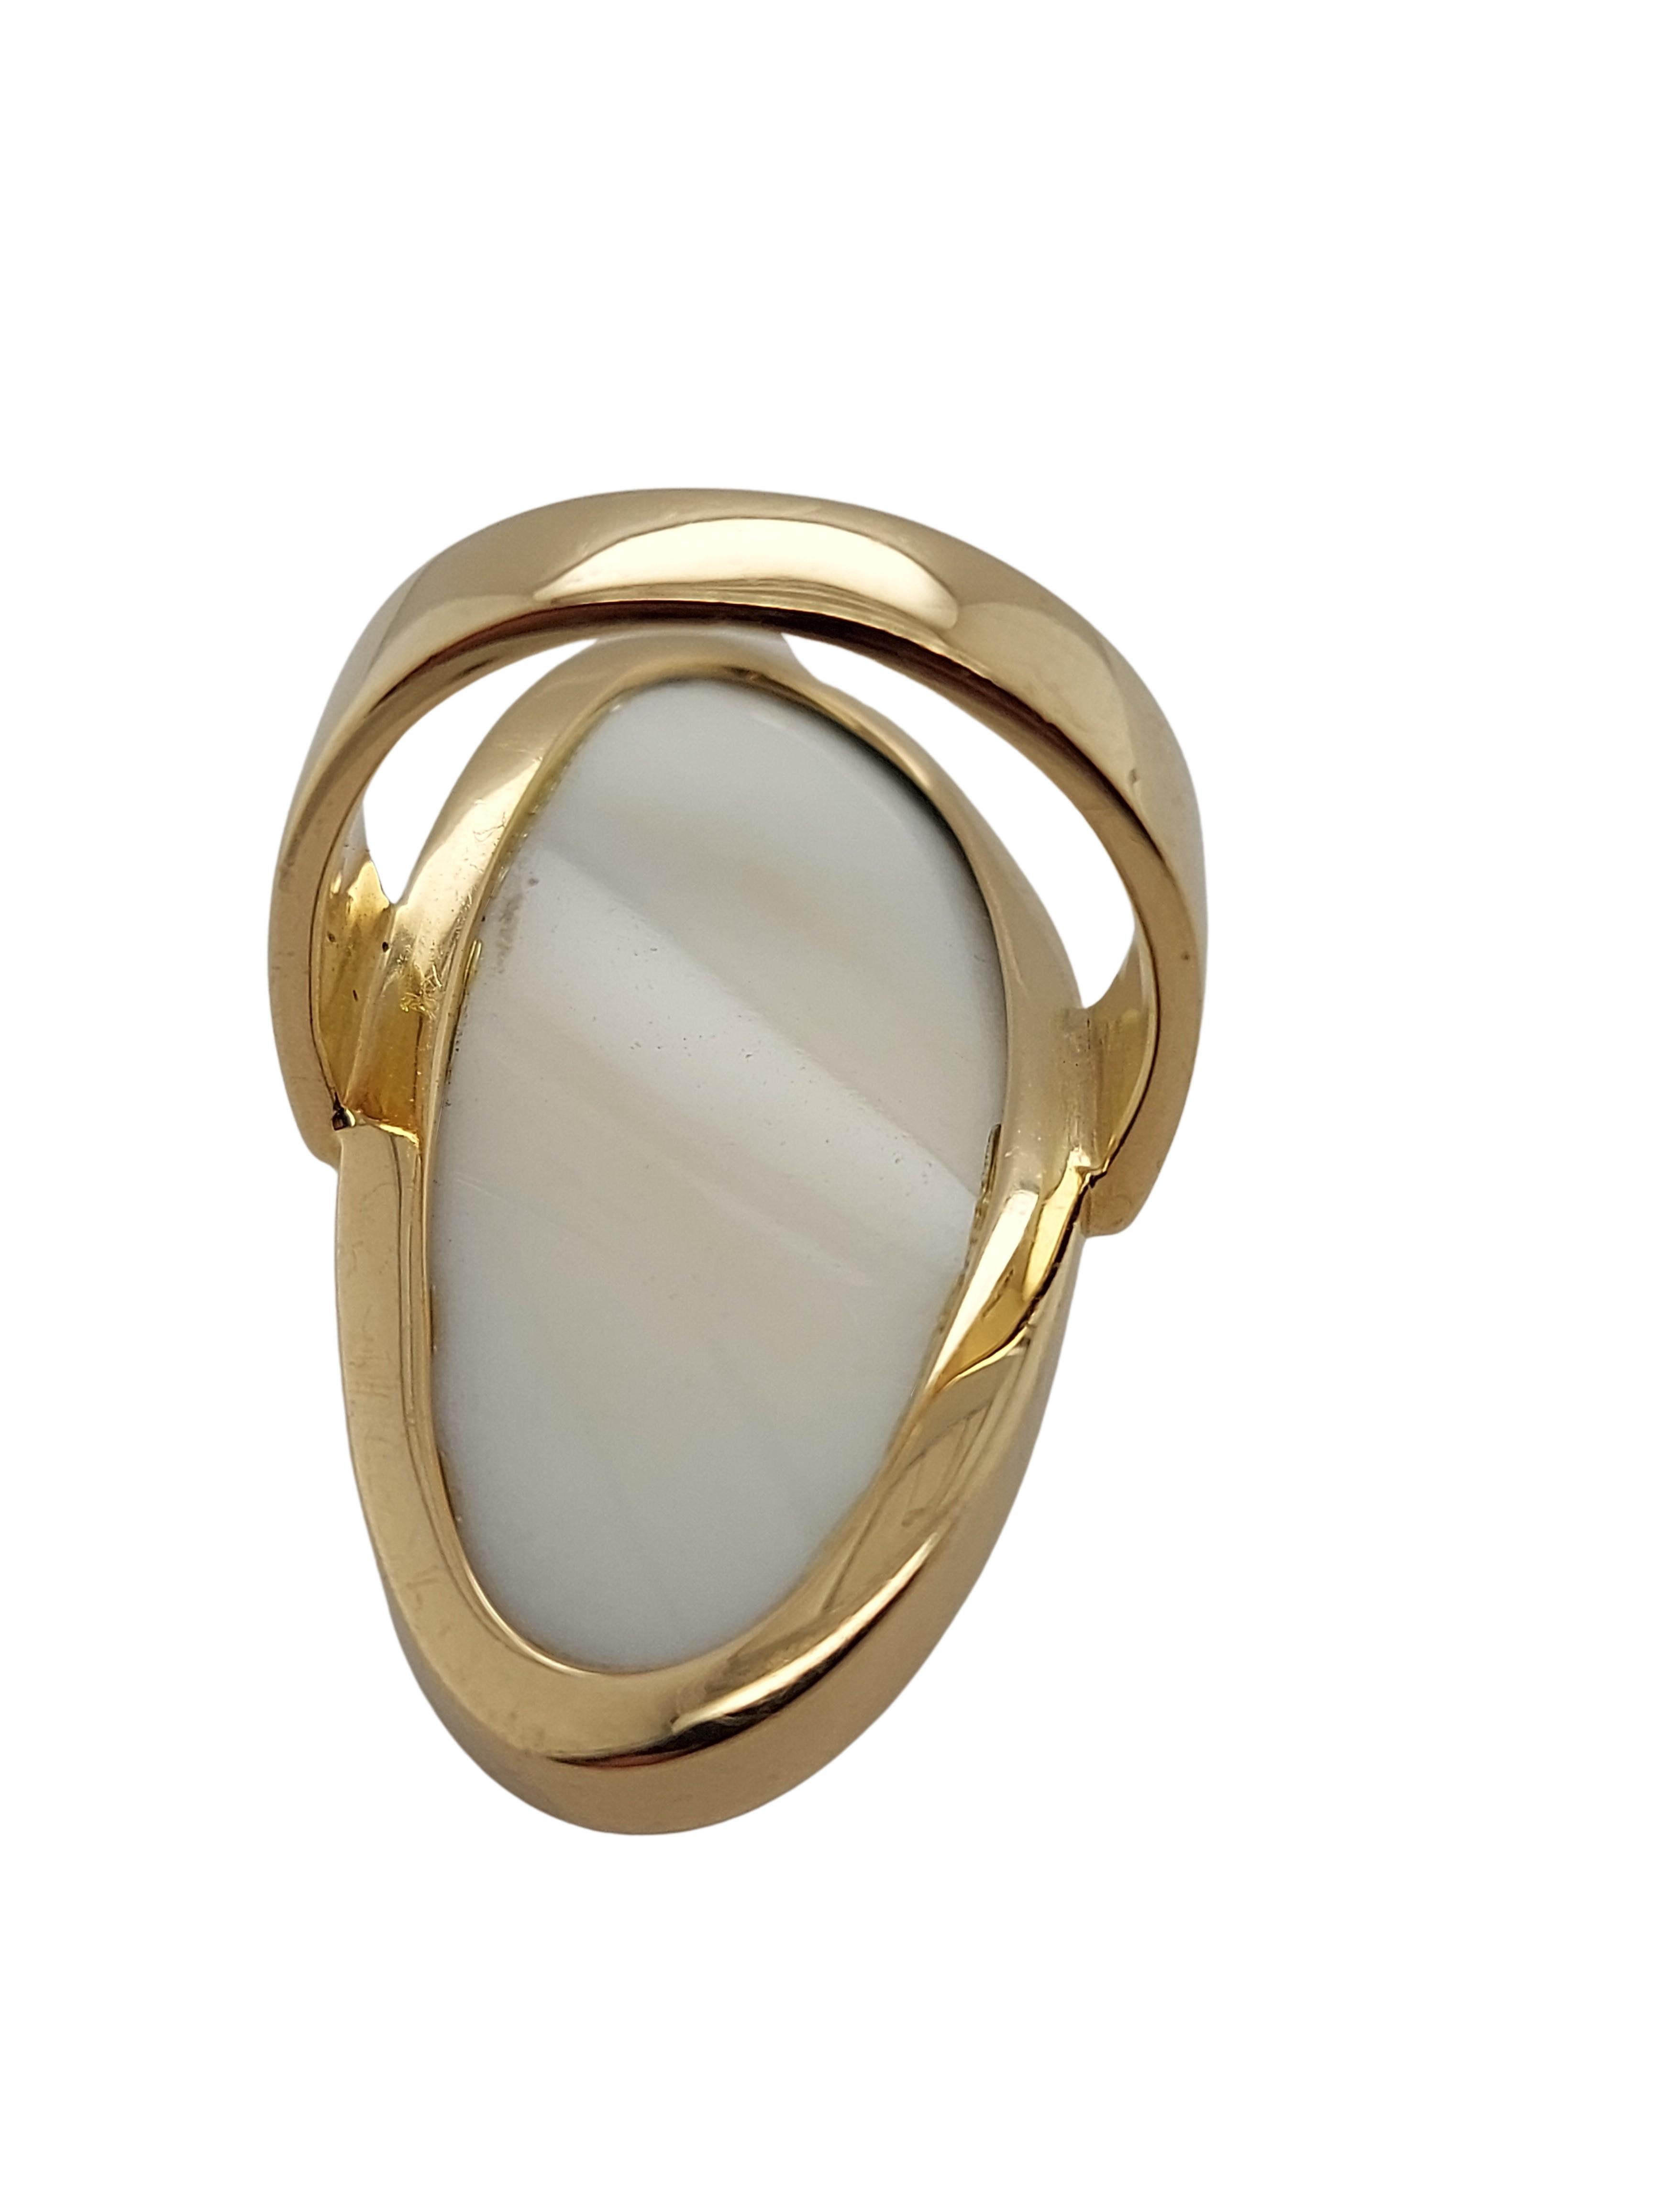 Magnificent and Rare 18kt Yellow Gold Mattioli Hiroko Ring with Kogolong For Sale 4